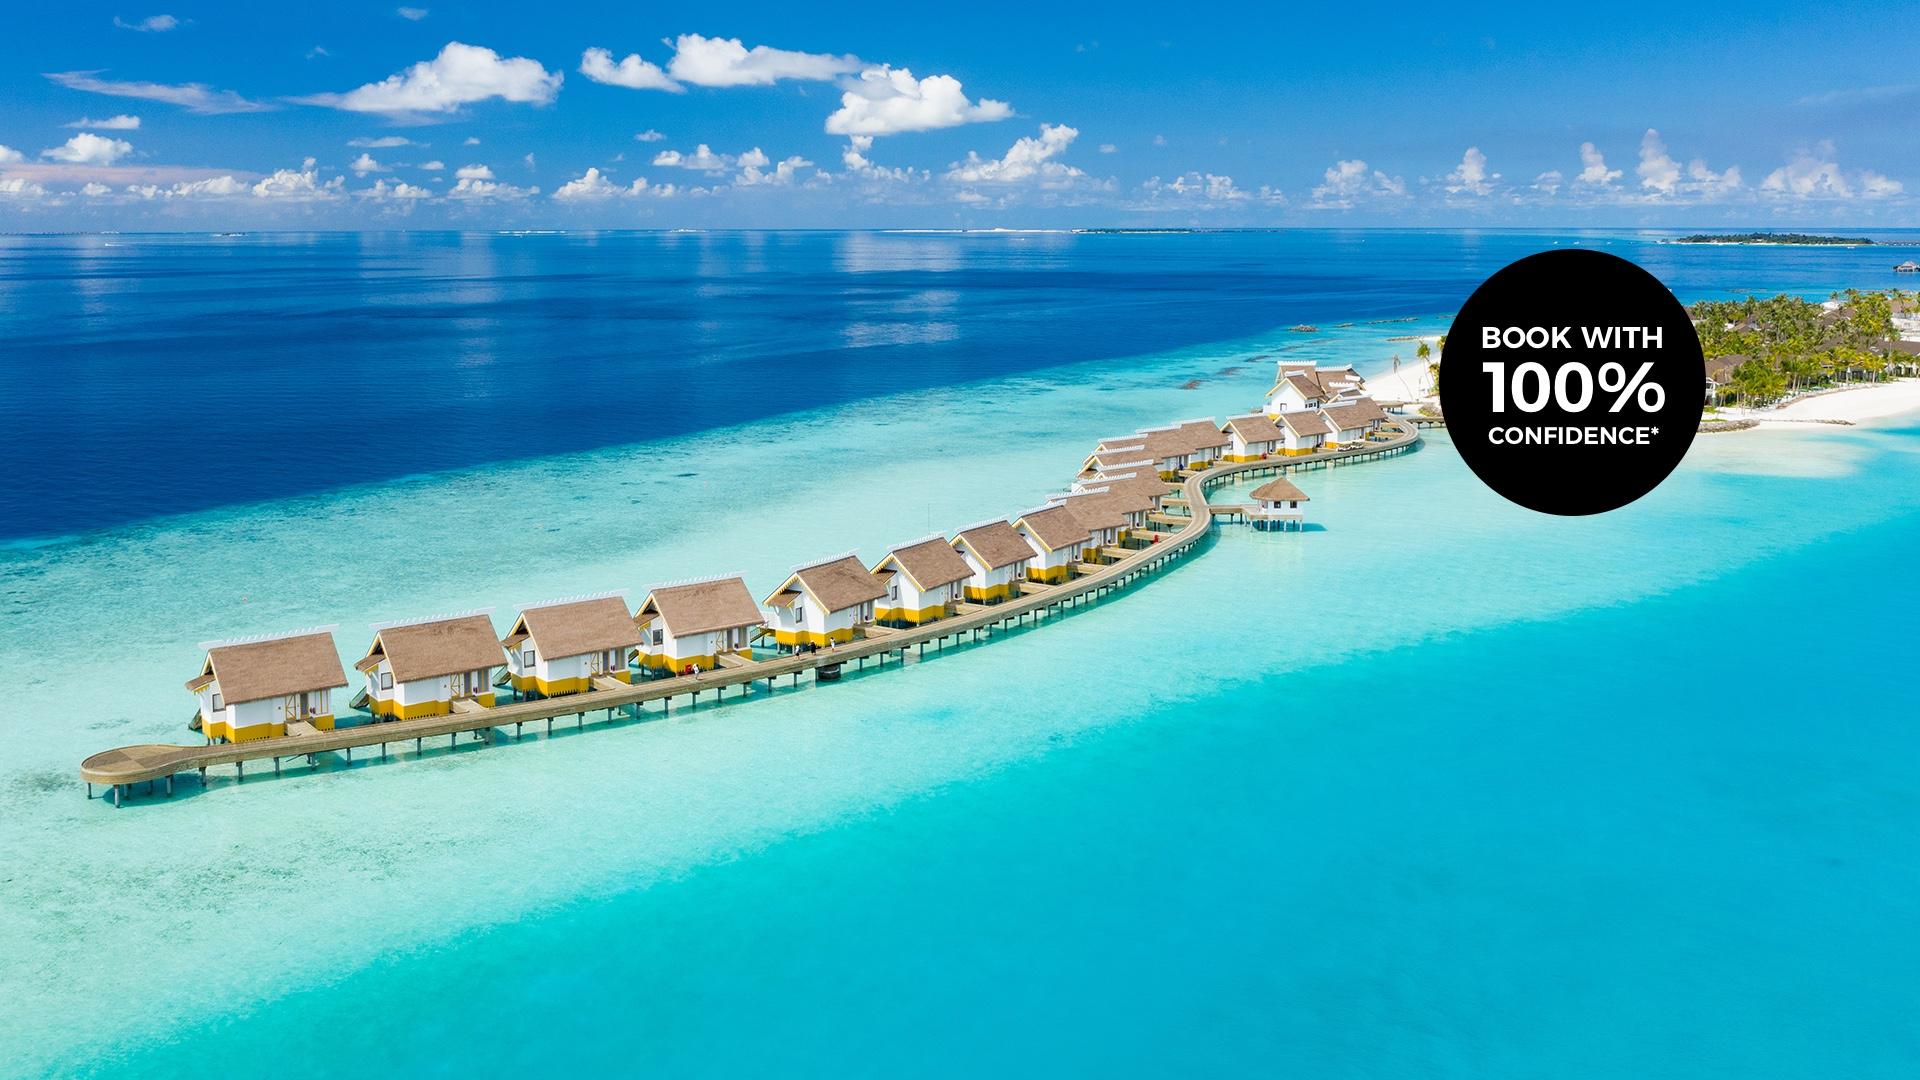 maldives travel package price